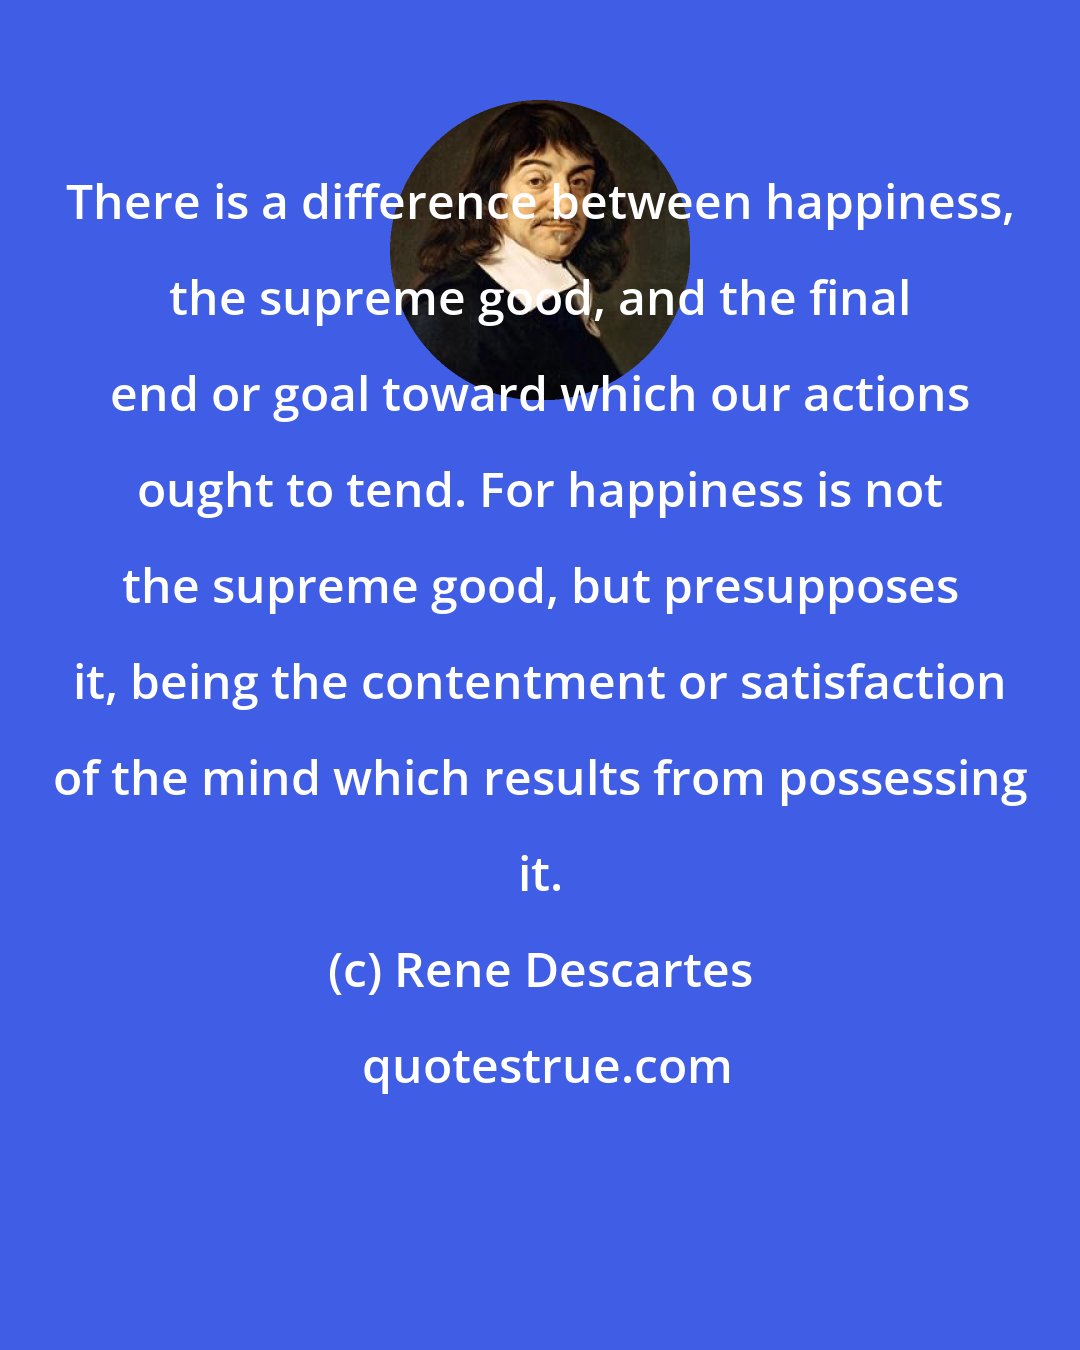 Rene Descartes: There is a difference between happiness, the supreme good, and the final end or goal toward which our actions ought to tend. For happiness is not the supreme good, but presupposes it, being the contentment or satisfaction of the mind which results from possessing it.